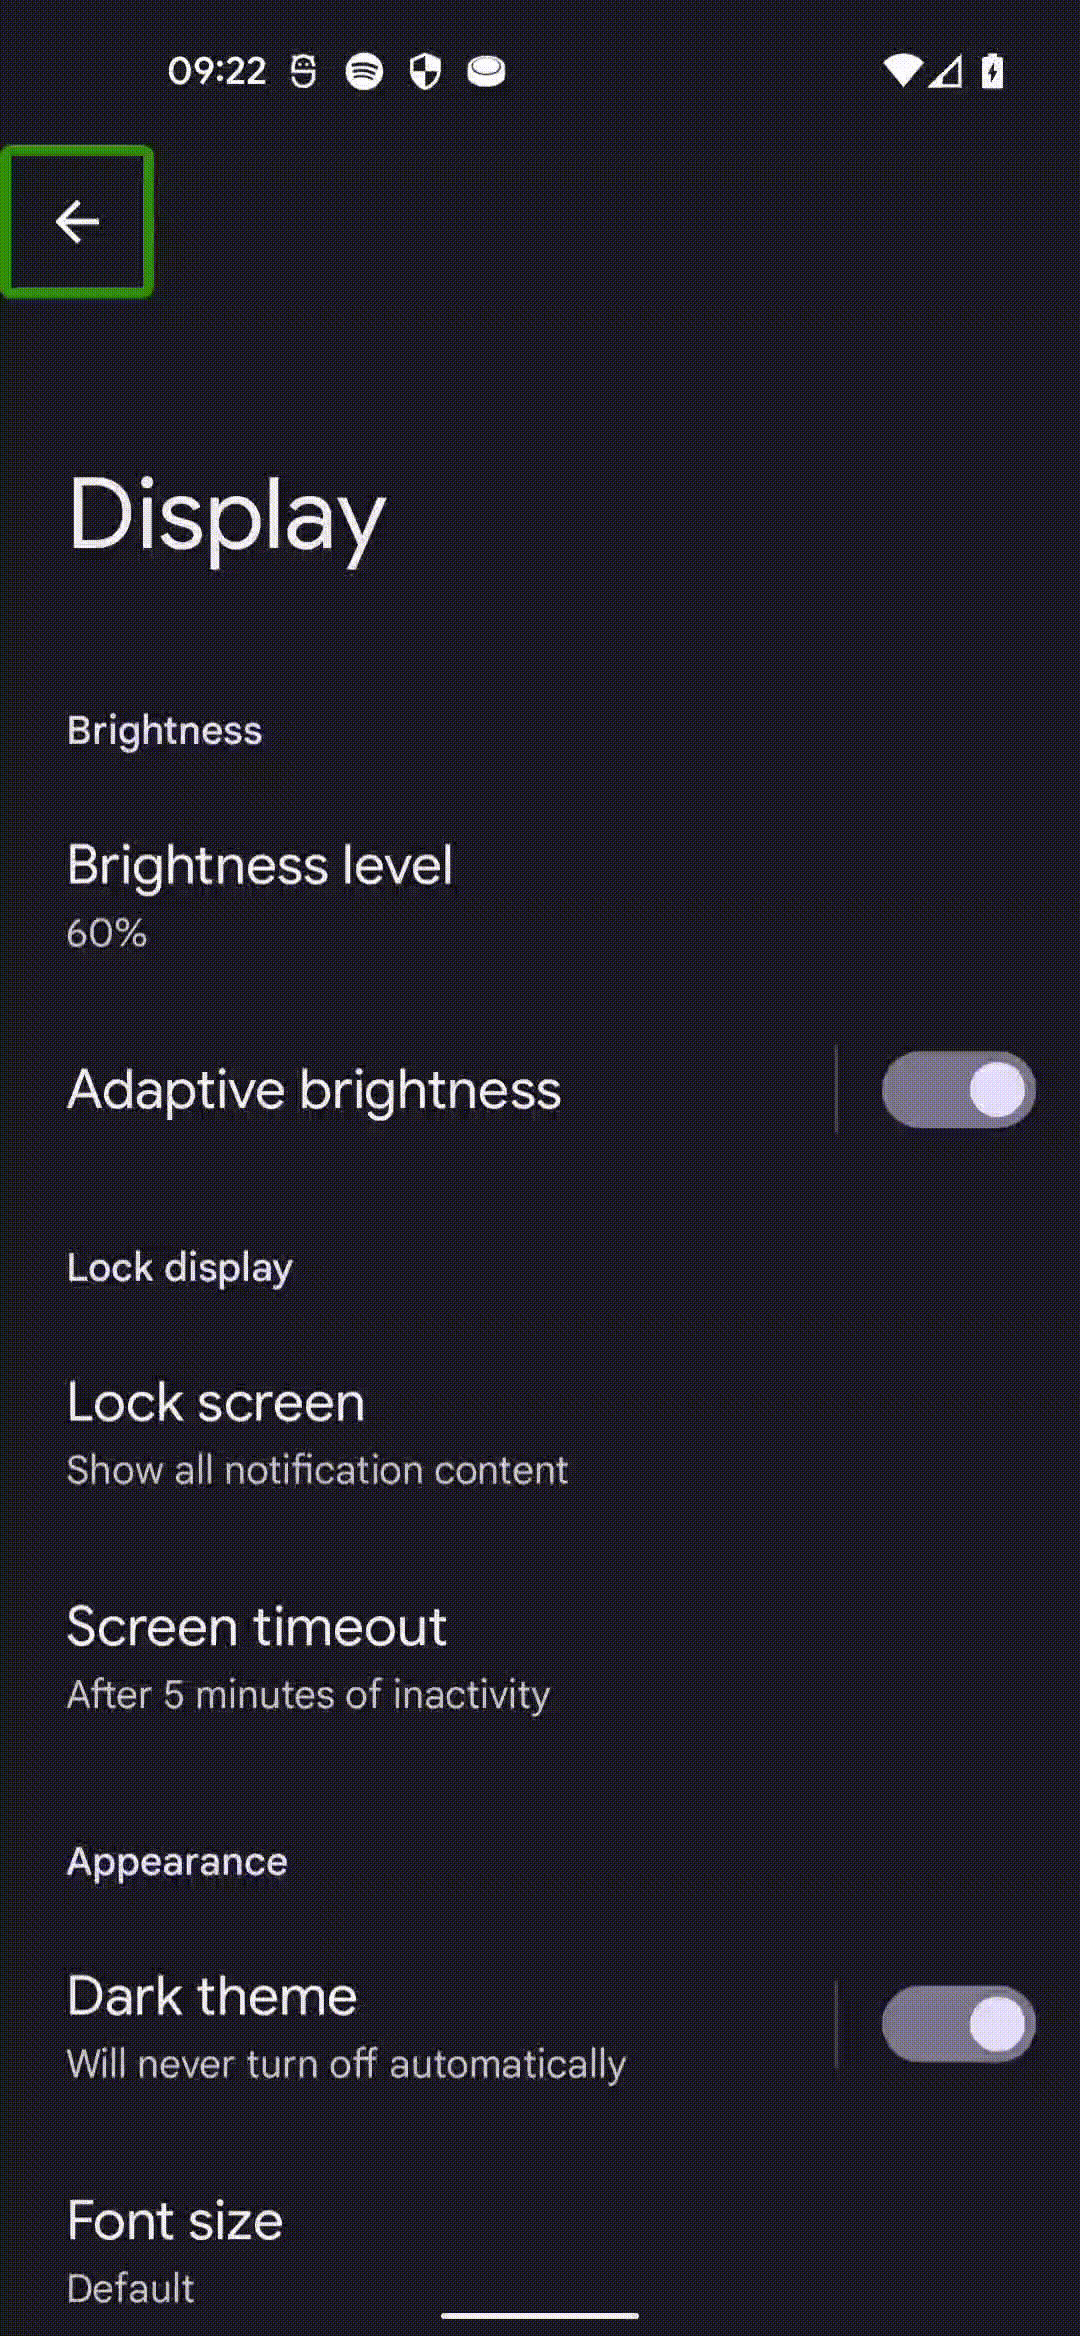 A Pixel phone with TalkBack on, opened at the display settings screen. The background is black and the back button at the top is highlighted. Swipes are made visible with a white dot and Text To Speech can be read via toast messages appearing at the bottom. Swipe left. The top block is highlighted and "Display" is read aloud. Swipe right, the back button is highlighted and "Navigate Up, Button, Double Tap to activate" is displayed. Swipe right. Brightness small heading is highlighted, toast message "Brightness". Swipe right, Brightness control is highlighted, toast displays "Brightness level, 60%, Double Tap to activate". Swipe right, Adaptive brightness control focussed, toast message "Adaptive Brightness, Double tap to activate" is displayed. Swipe right, Adaptive brightness switch focussed, toast message "ON, Adaptive Brightness Switch, Double Tap to toggle" is displayed. Swipe right. Lock display small heading is highlighted, toast message "Lock display". Swipe left, Adaptive brightness switch focussed, toast message "ON, Adaptive Brightness Switch, Double Tap to toggle" is displayed. Double tap, Toggle turns off, toast displays "OFF". Double tap, Toggle turns on, toast displays "ON". Repeat OFF and ON. Swipe left, Adaptive brightness control focussed, toast message "Adaptive Brightness, Double tap to activate" is displayed. Single tap, nothing happens. Double tap, new screen opens with "Adaptive Brightness" at the top. The highlighted control is the top left back button, toast message "Adaptive brightness, Navigate up button, out of list, double tap to activate." Double tap, back to the Display screen with the Adaptive brightness control focussed, toast message "Adaptive Brightness, Double tap to activate" is displayed. Swipe left, Brightness control is highlighted, toast displays "Brightness level, 59%, Double Tap to activate"